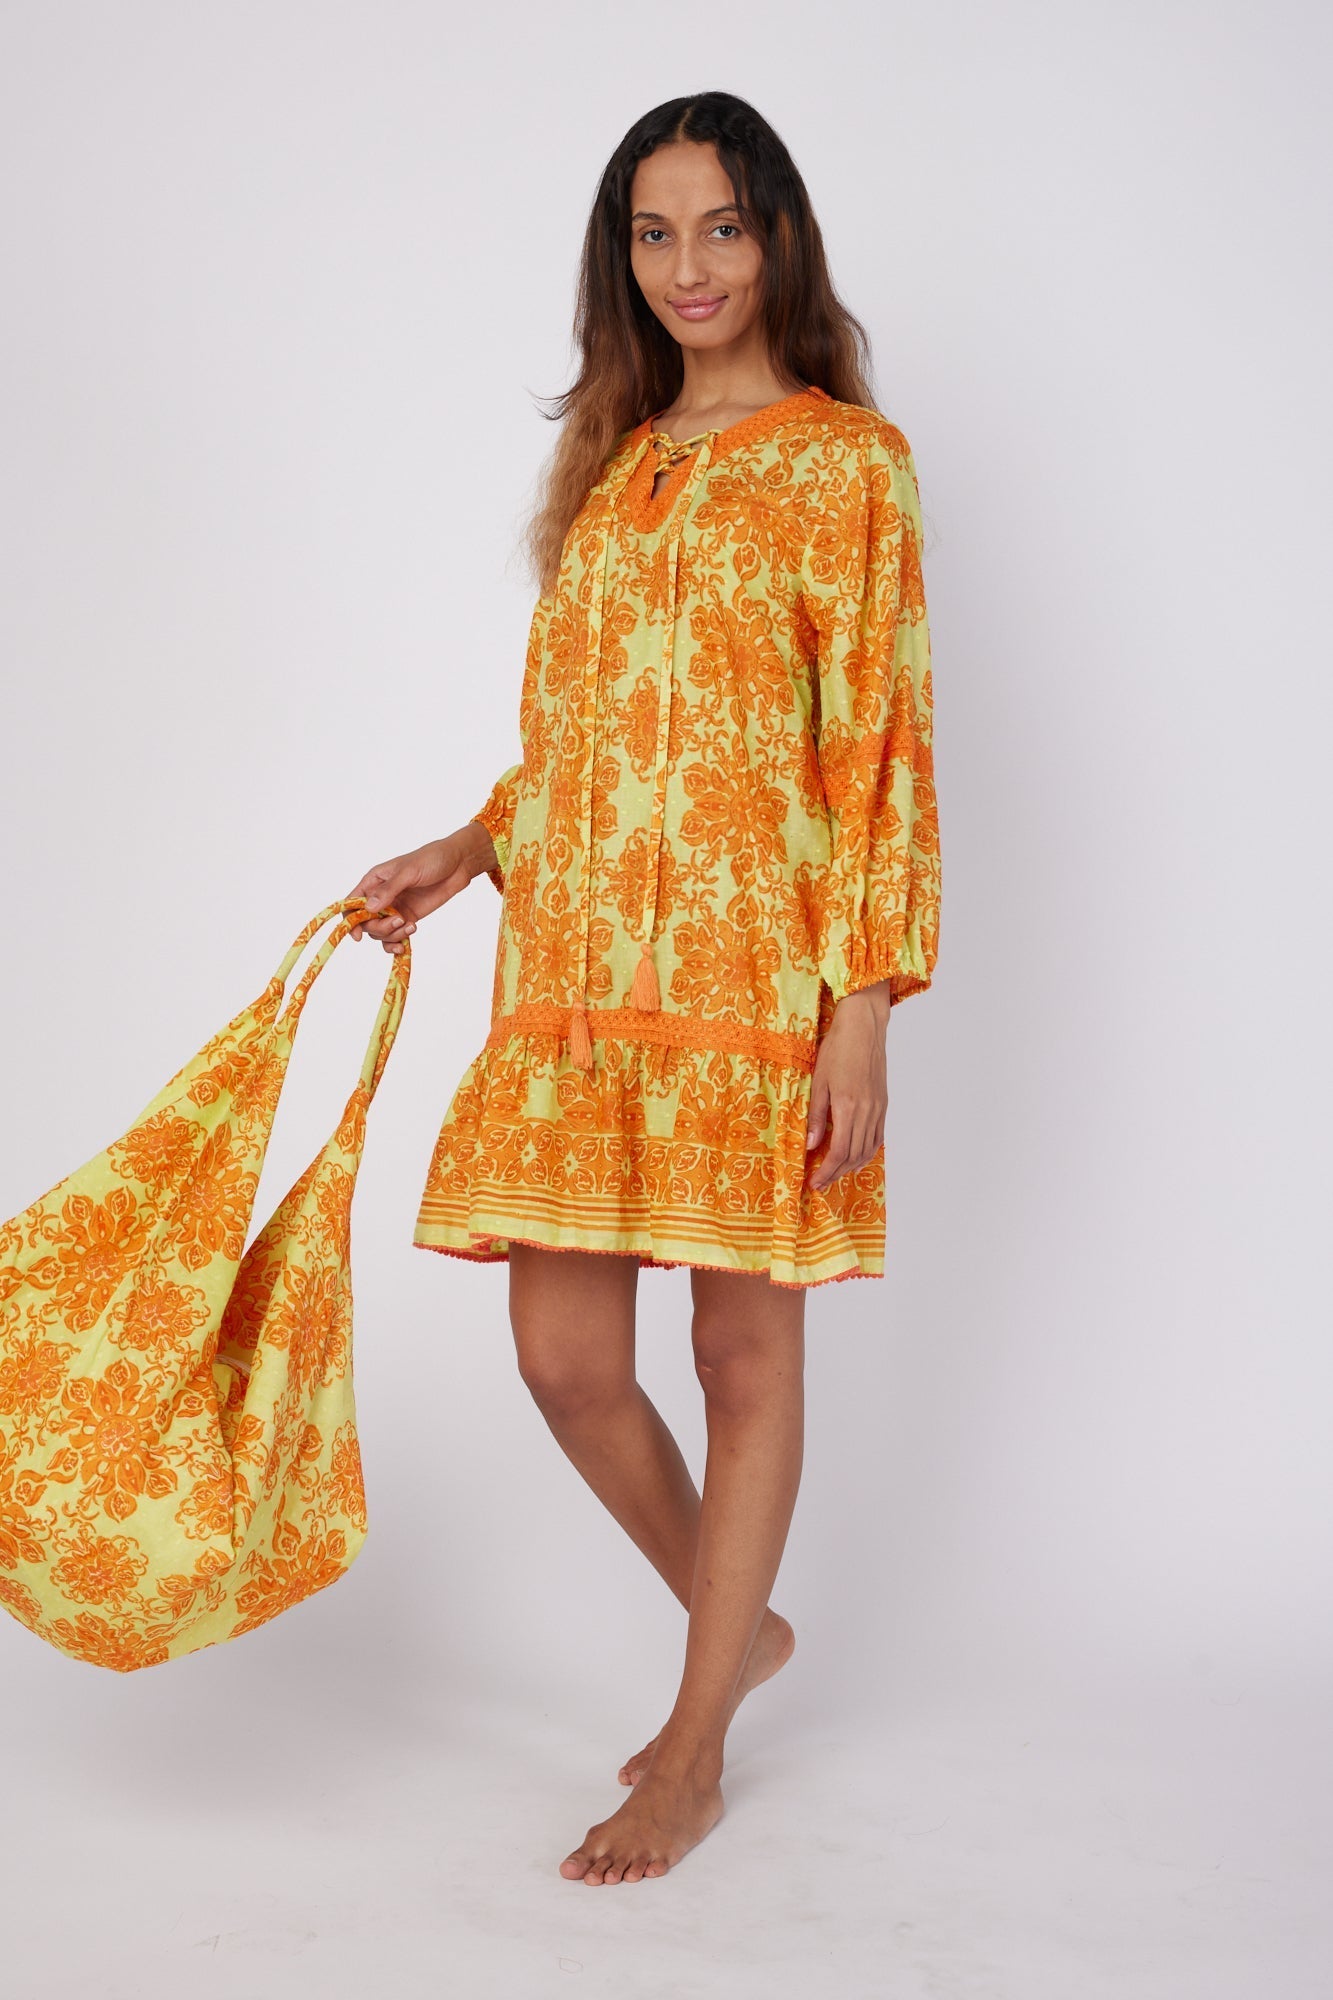 ModaPosa Ilaria Puff Sleeve Drop Waist Hand Embroidered Knee Length Dress with Lace Trim in Curacao Majolica . Discover women's resort dresses and lifestyle clothing inspired by the Mediterranean. Free worldwide shipping available!